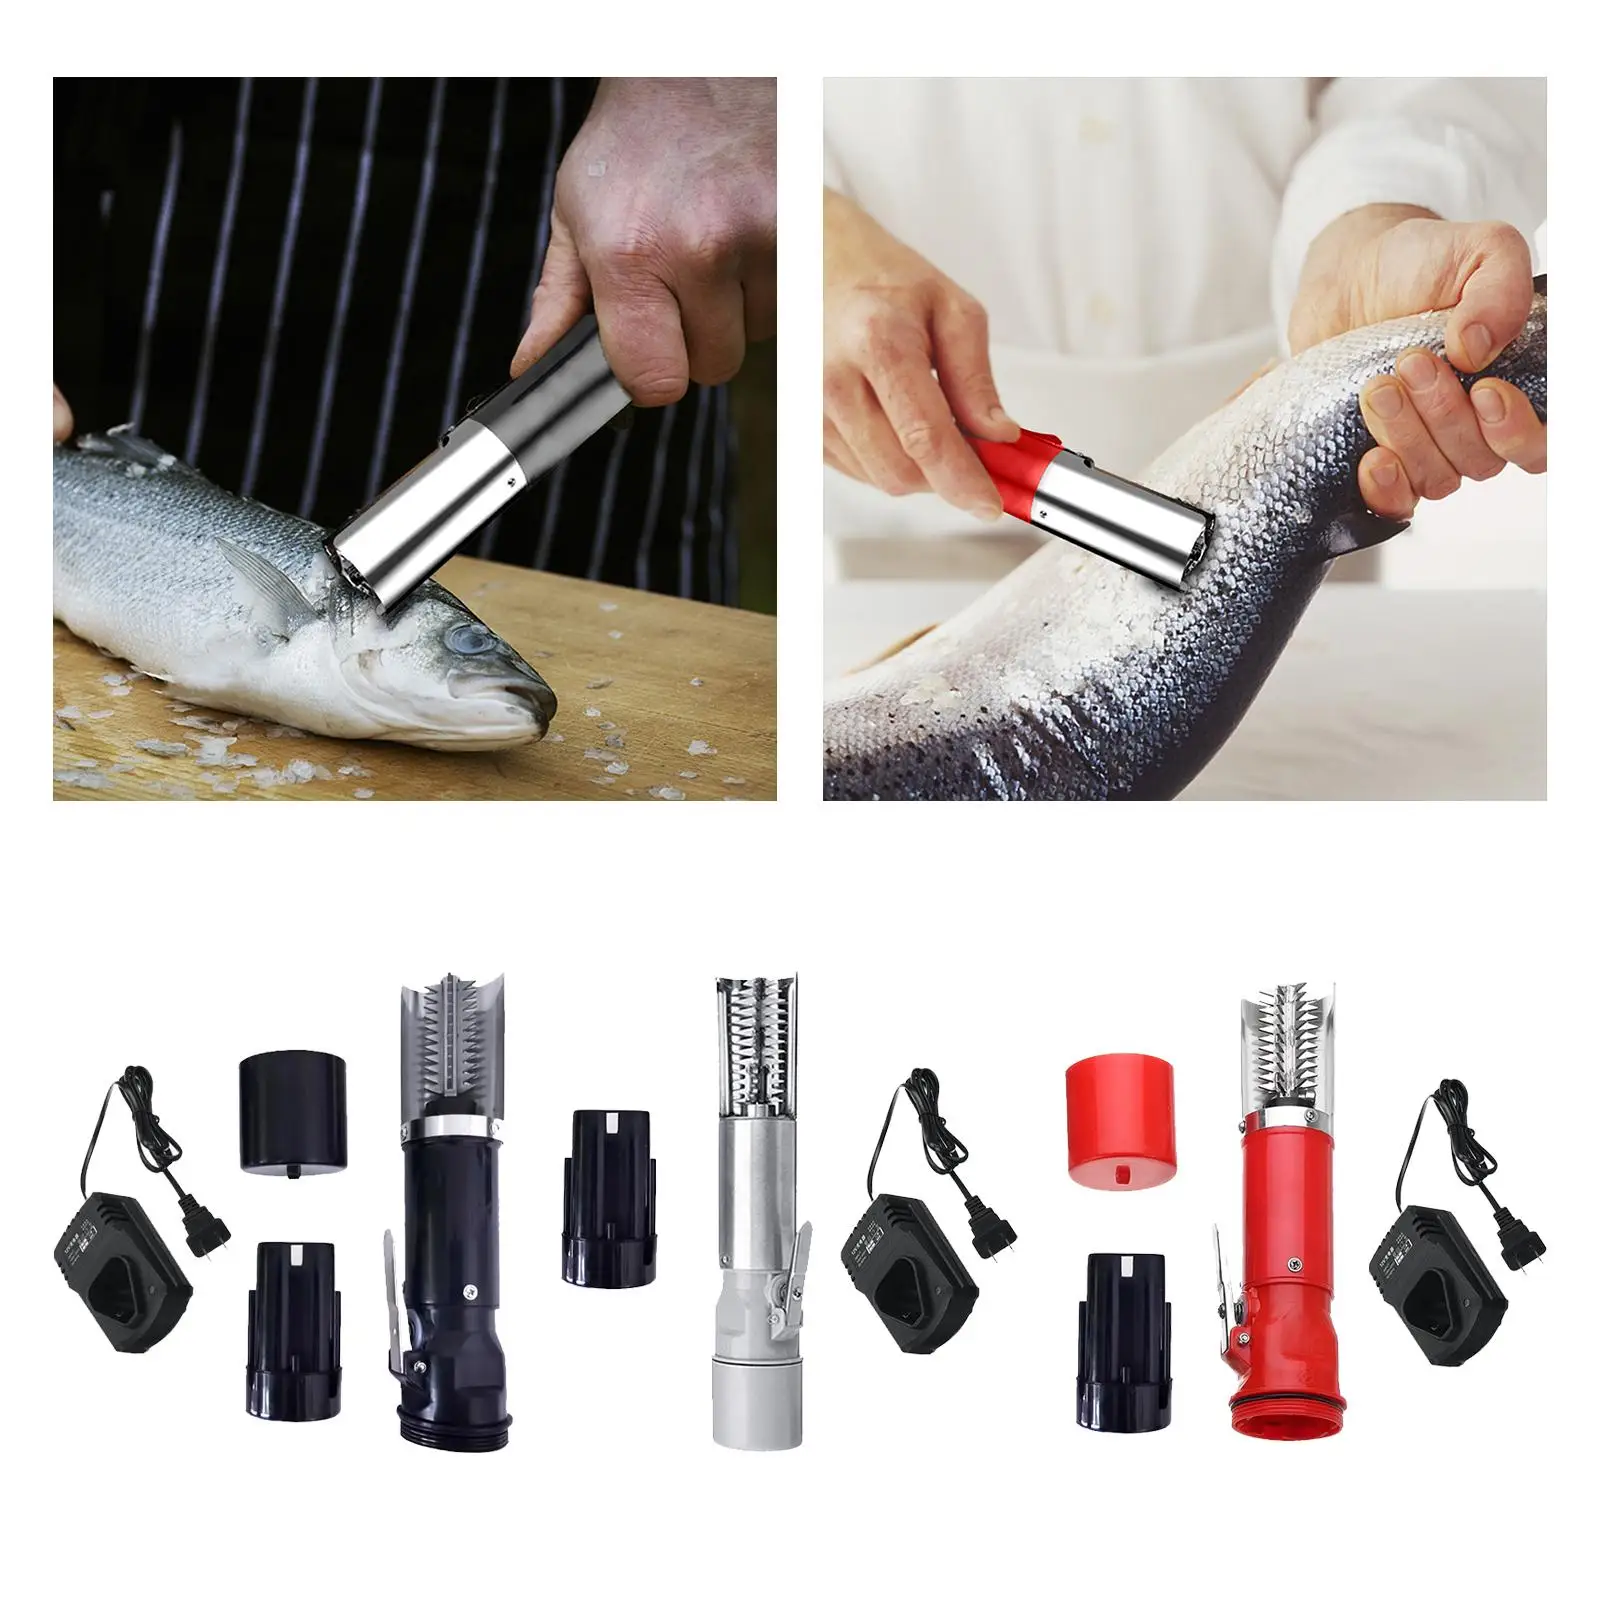 Electric Fish Scaler Easily Remove Fish Scales Descaler Seafood Tools Fish Scale Remover Cleaner for Kitchen Restaurant